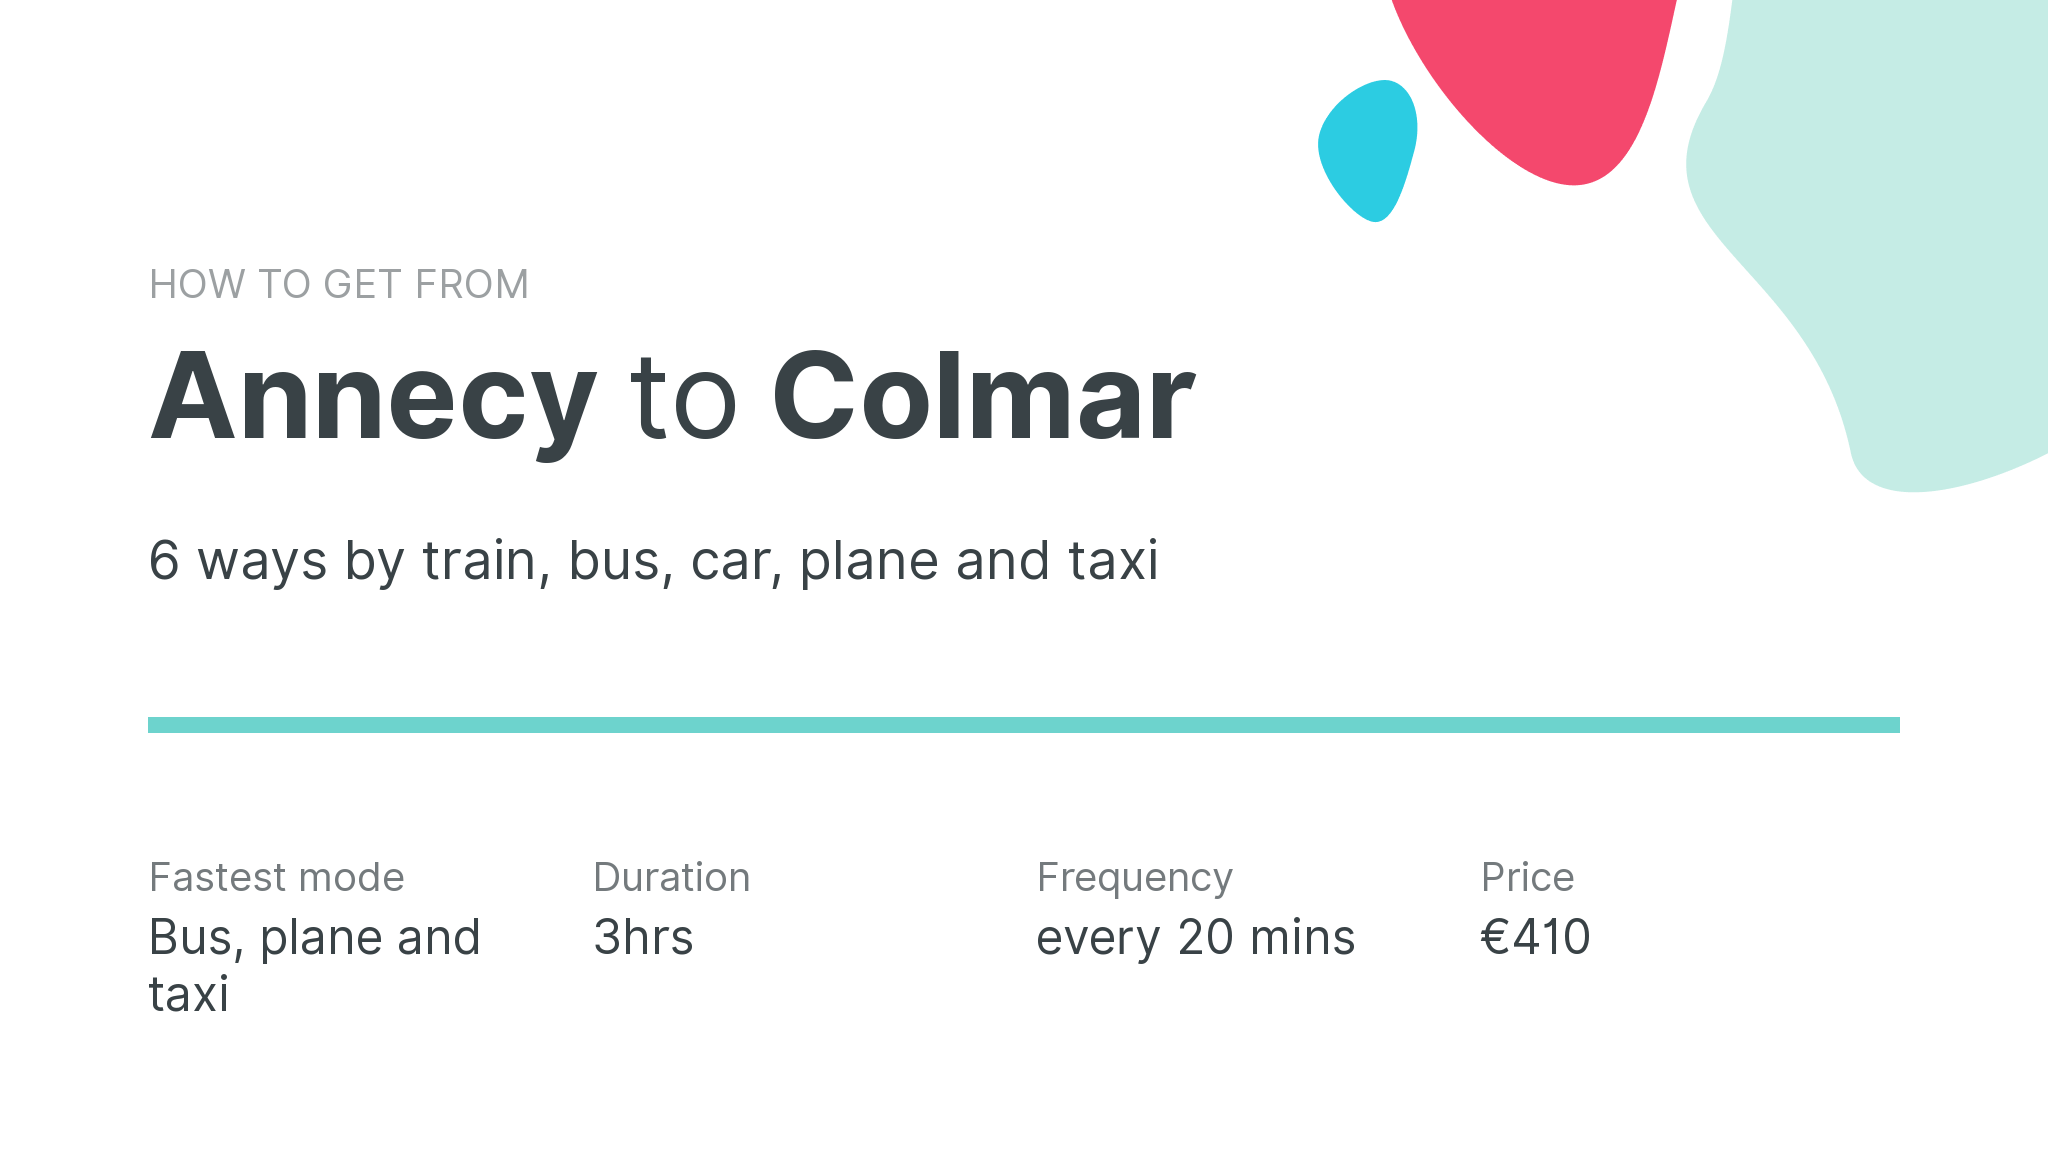 How do I get from Annecy to Colmar